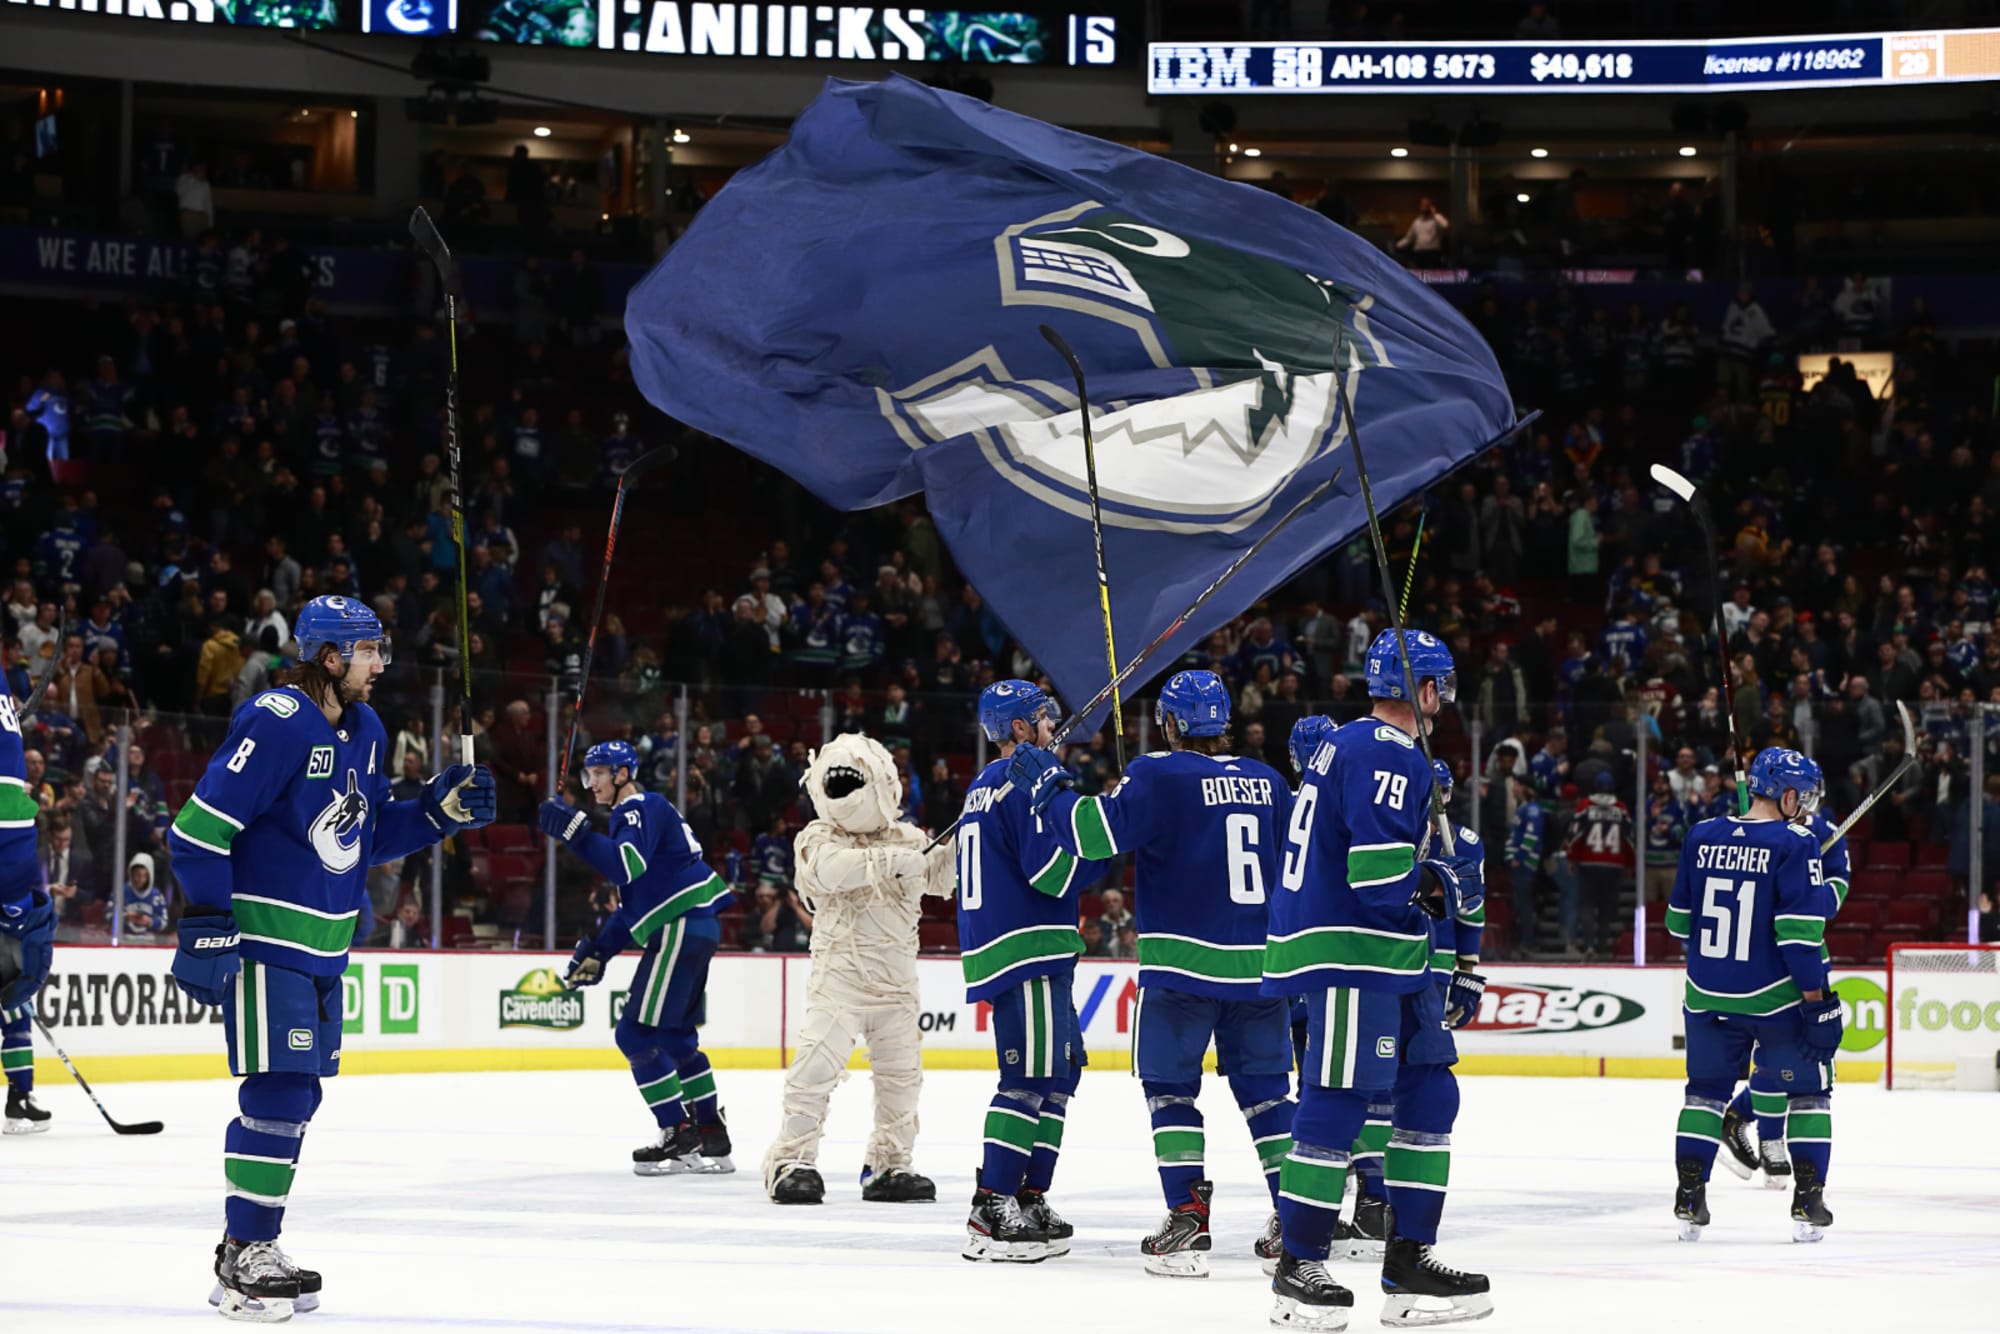 Vancouver Canucks - “I really want people to see it and feel more